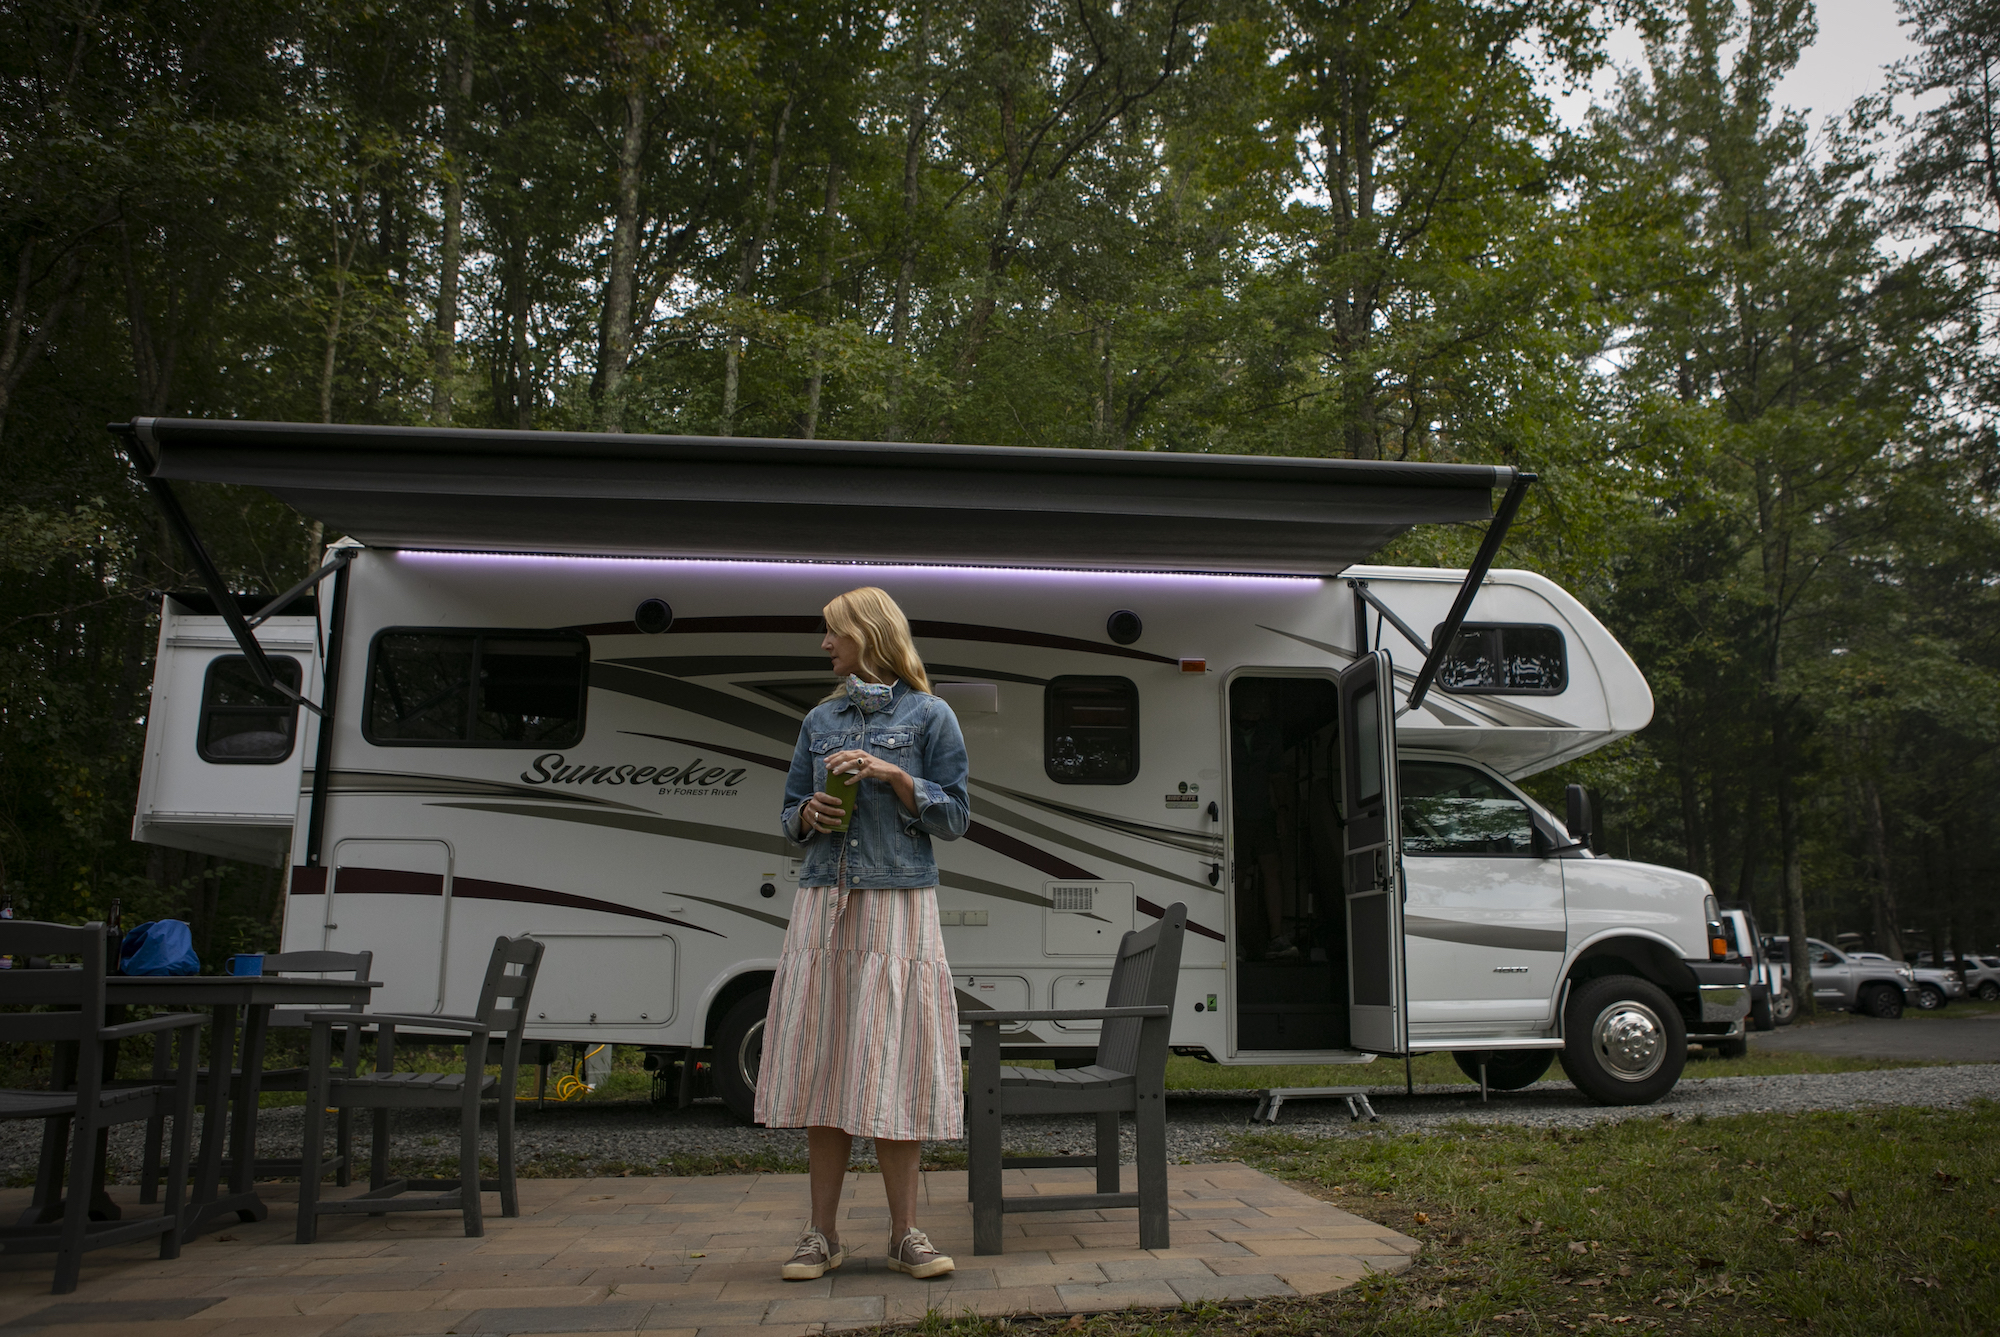 Washington Post travel writer Andrea Sachs stands outside of her rented RV Saturday, September 19, 2020 at a KOA campground in Fredericksburg, Virginia.